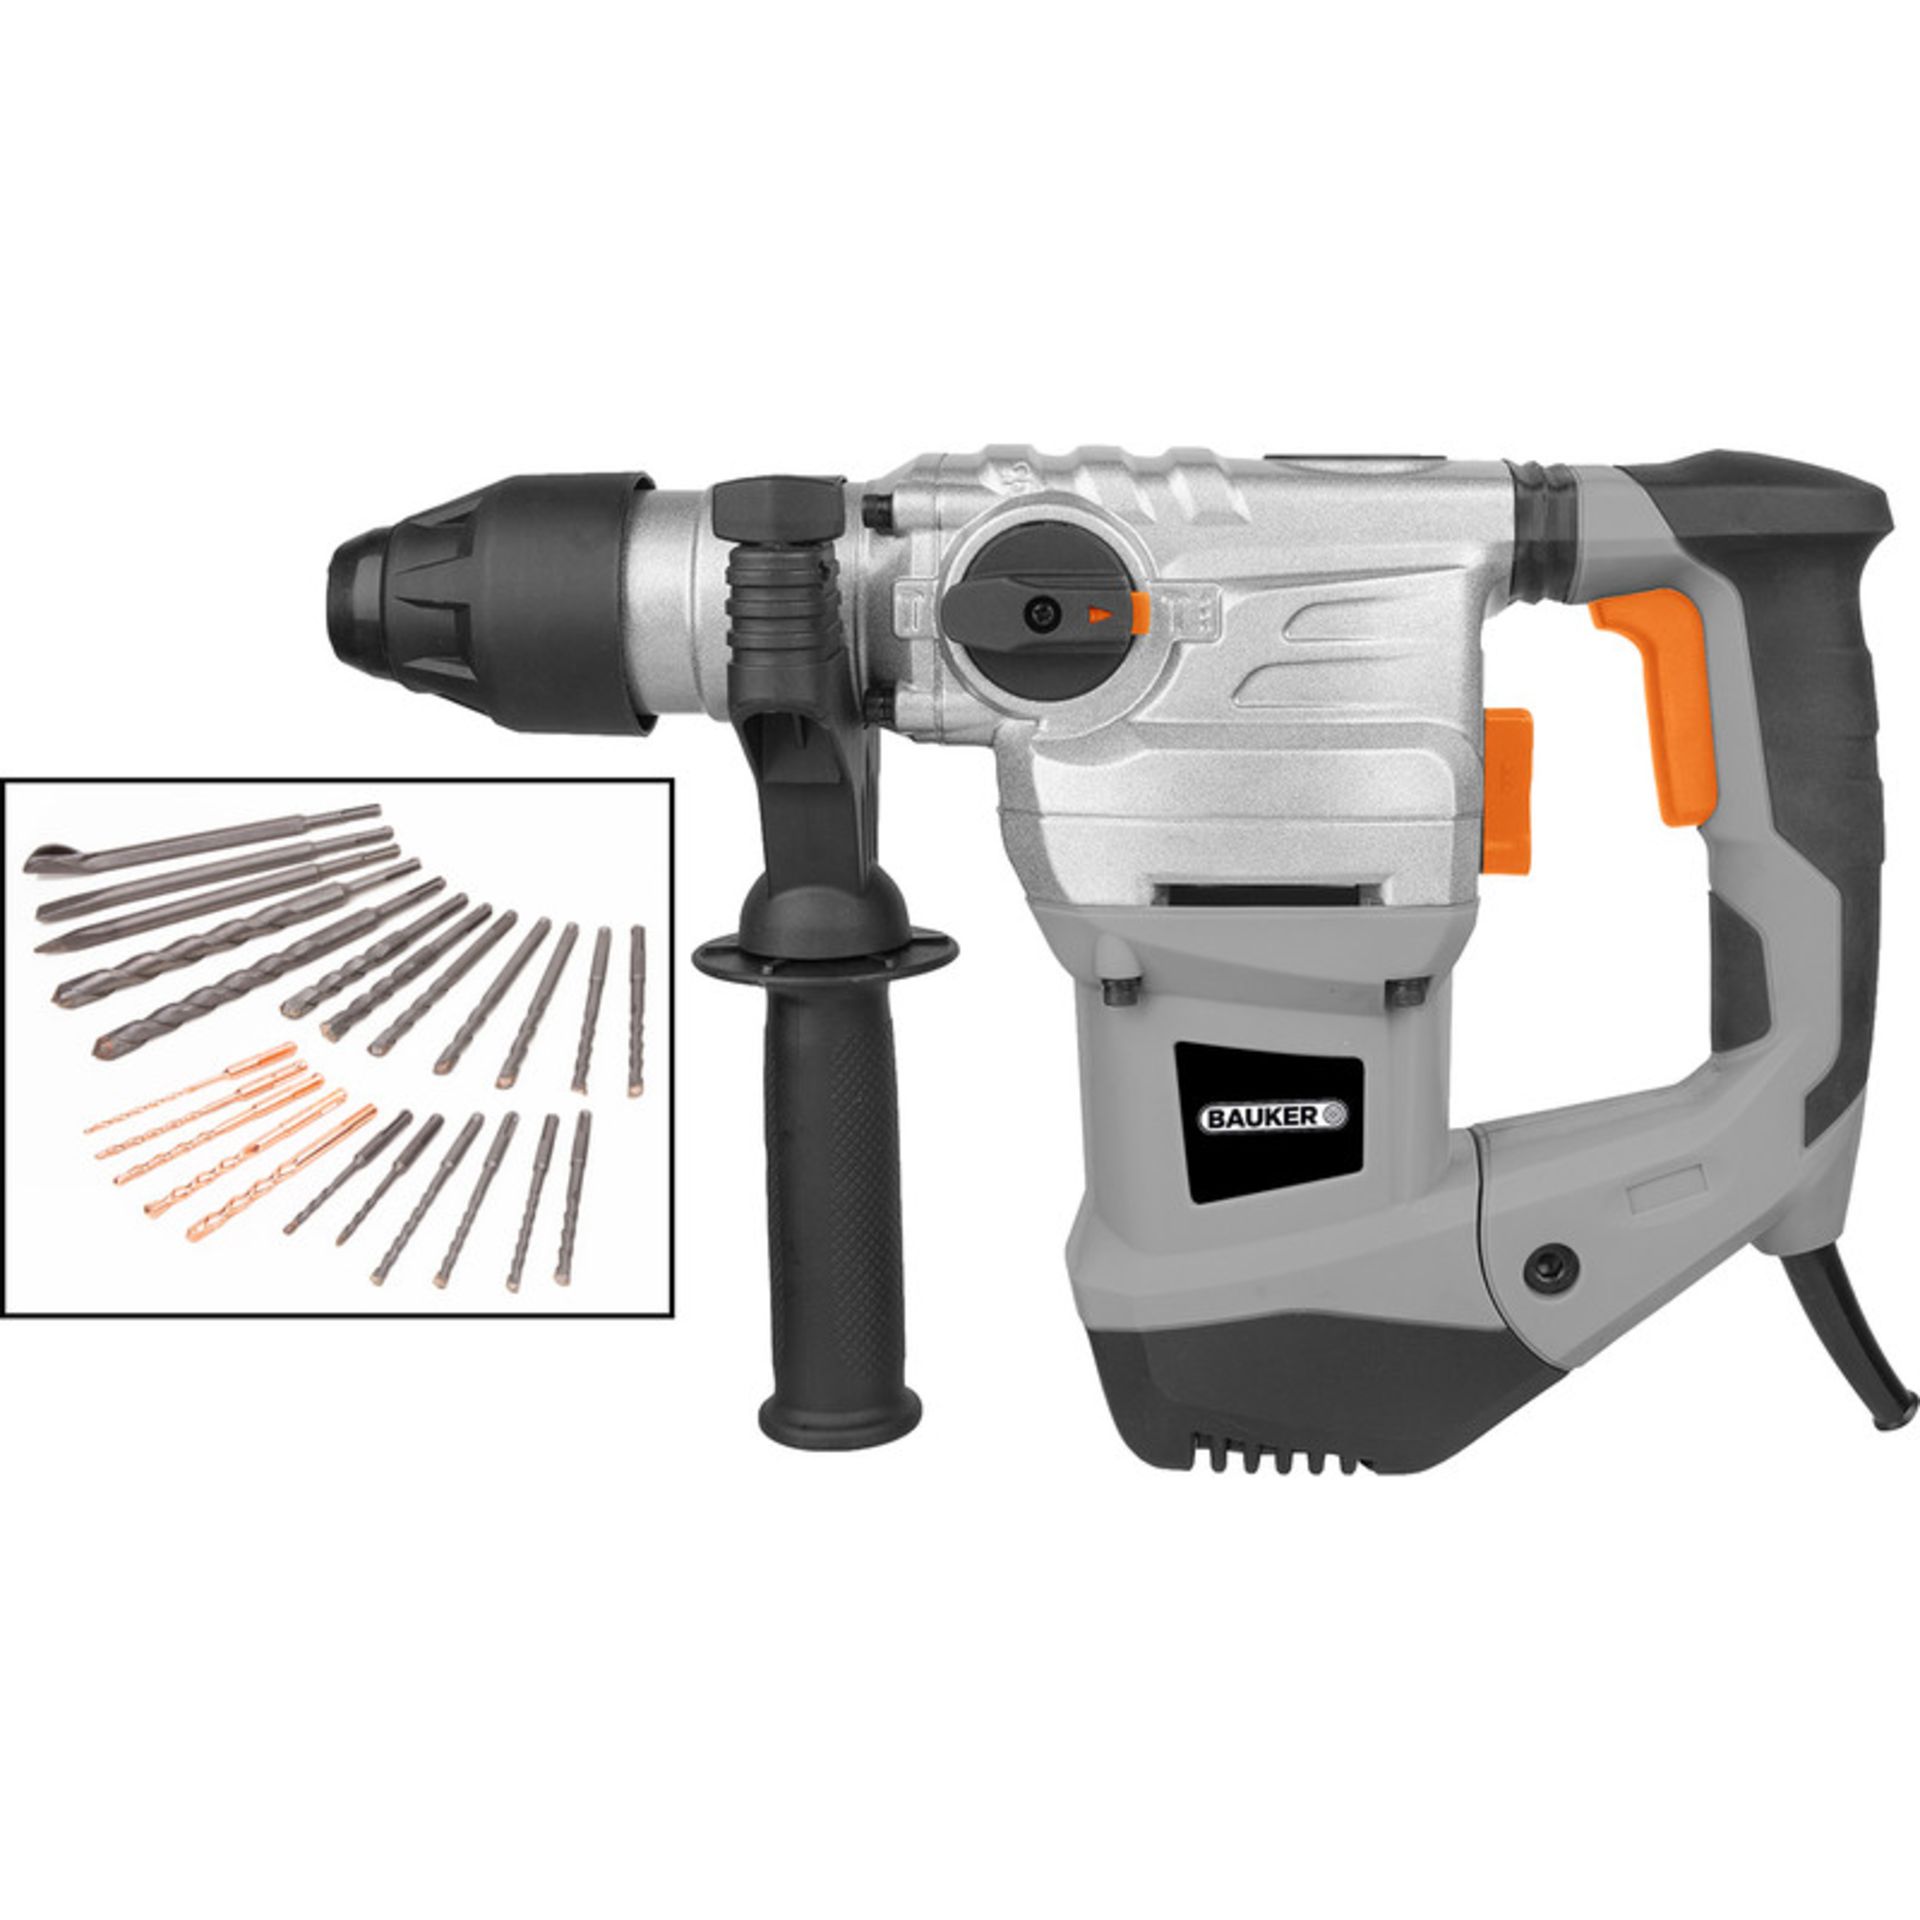 Boxed Bauker 1500W 32mm SDS Plus Rotary Hammer Drill 240V. • 3 functions: hammer drill, rotary drill